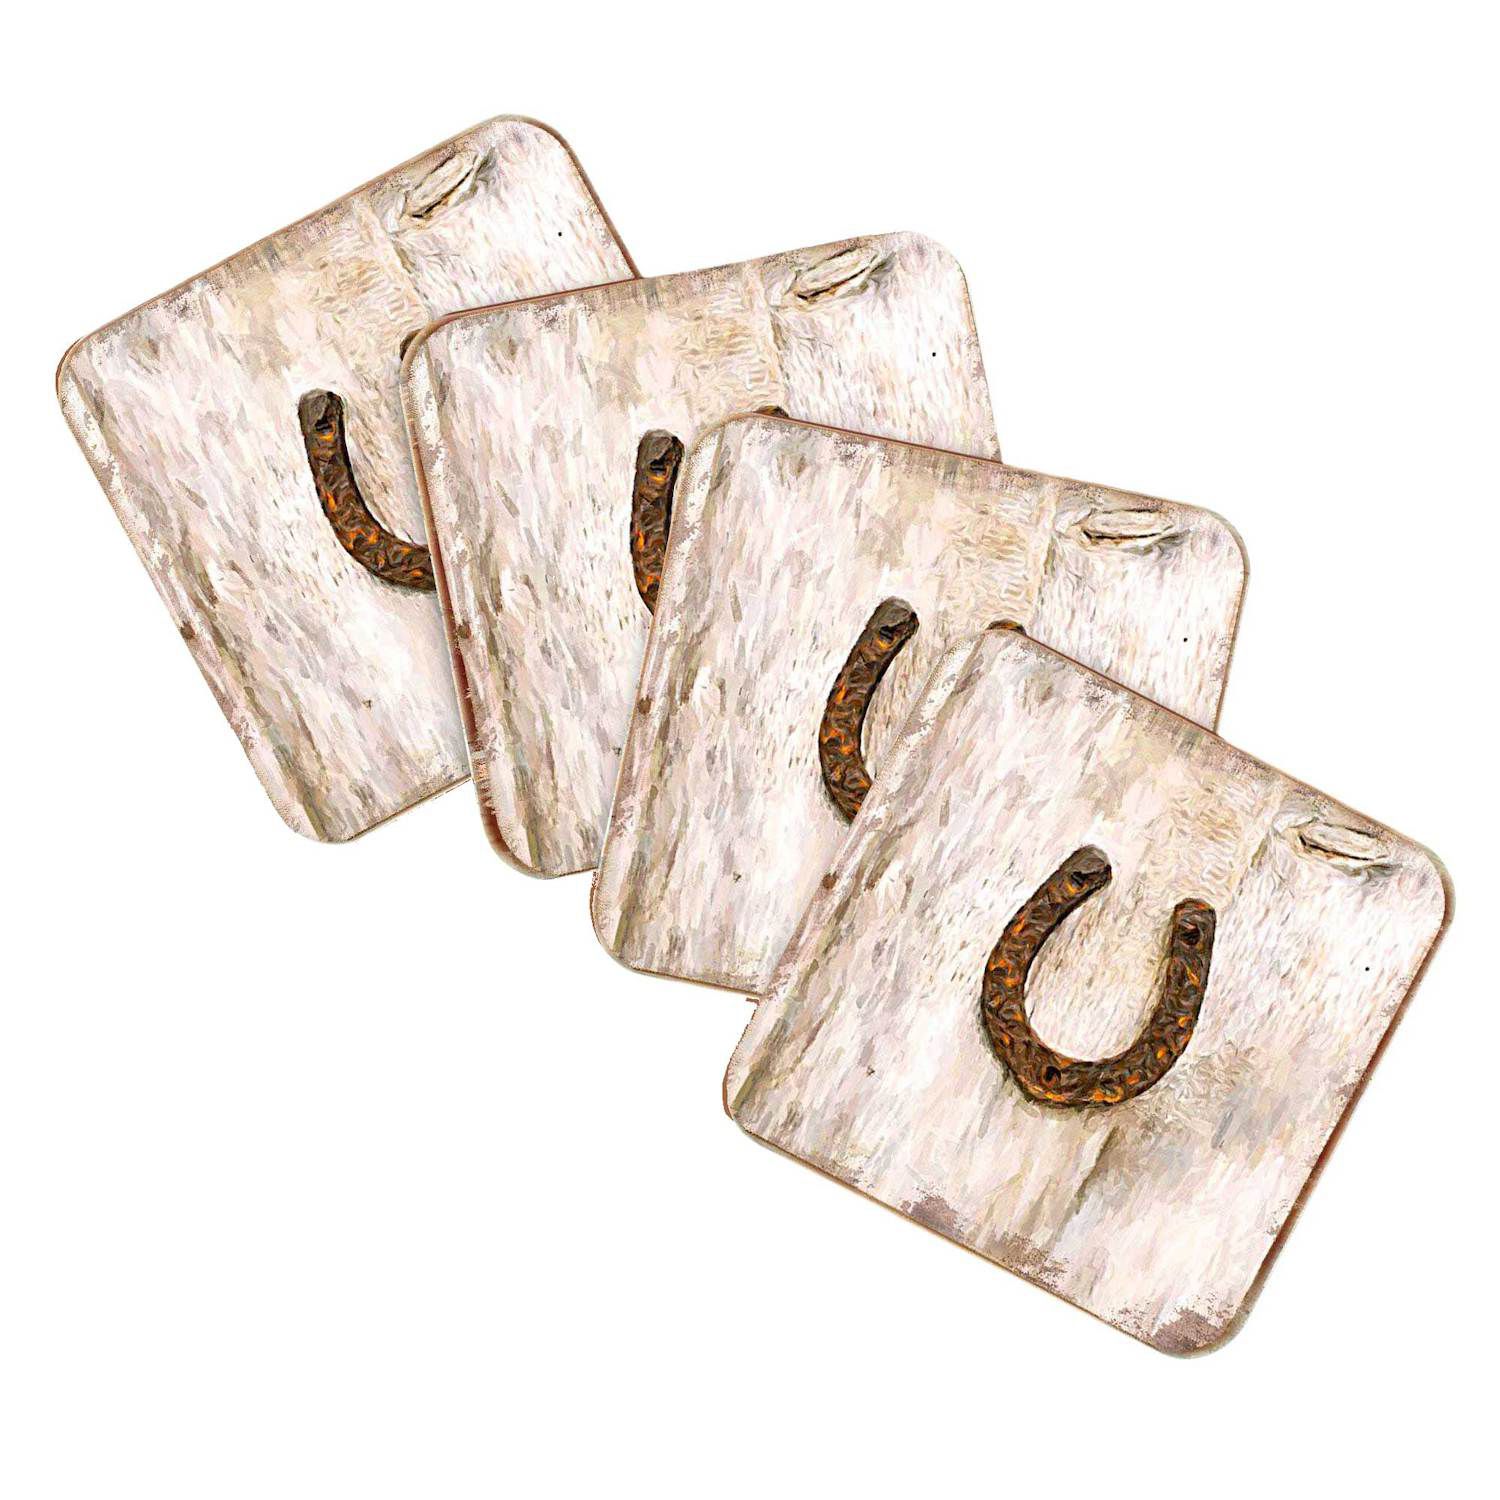 12 Pack Unfinished Wood Coasters for Crafts, Squares with Non-Slip